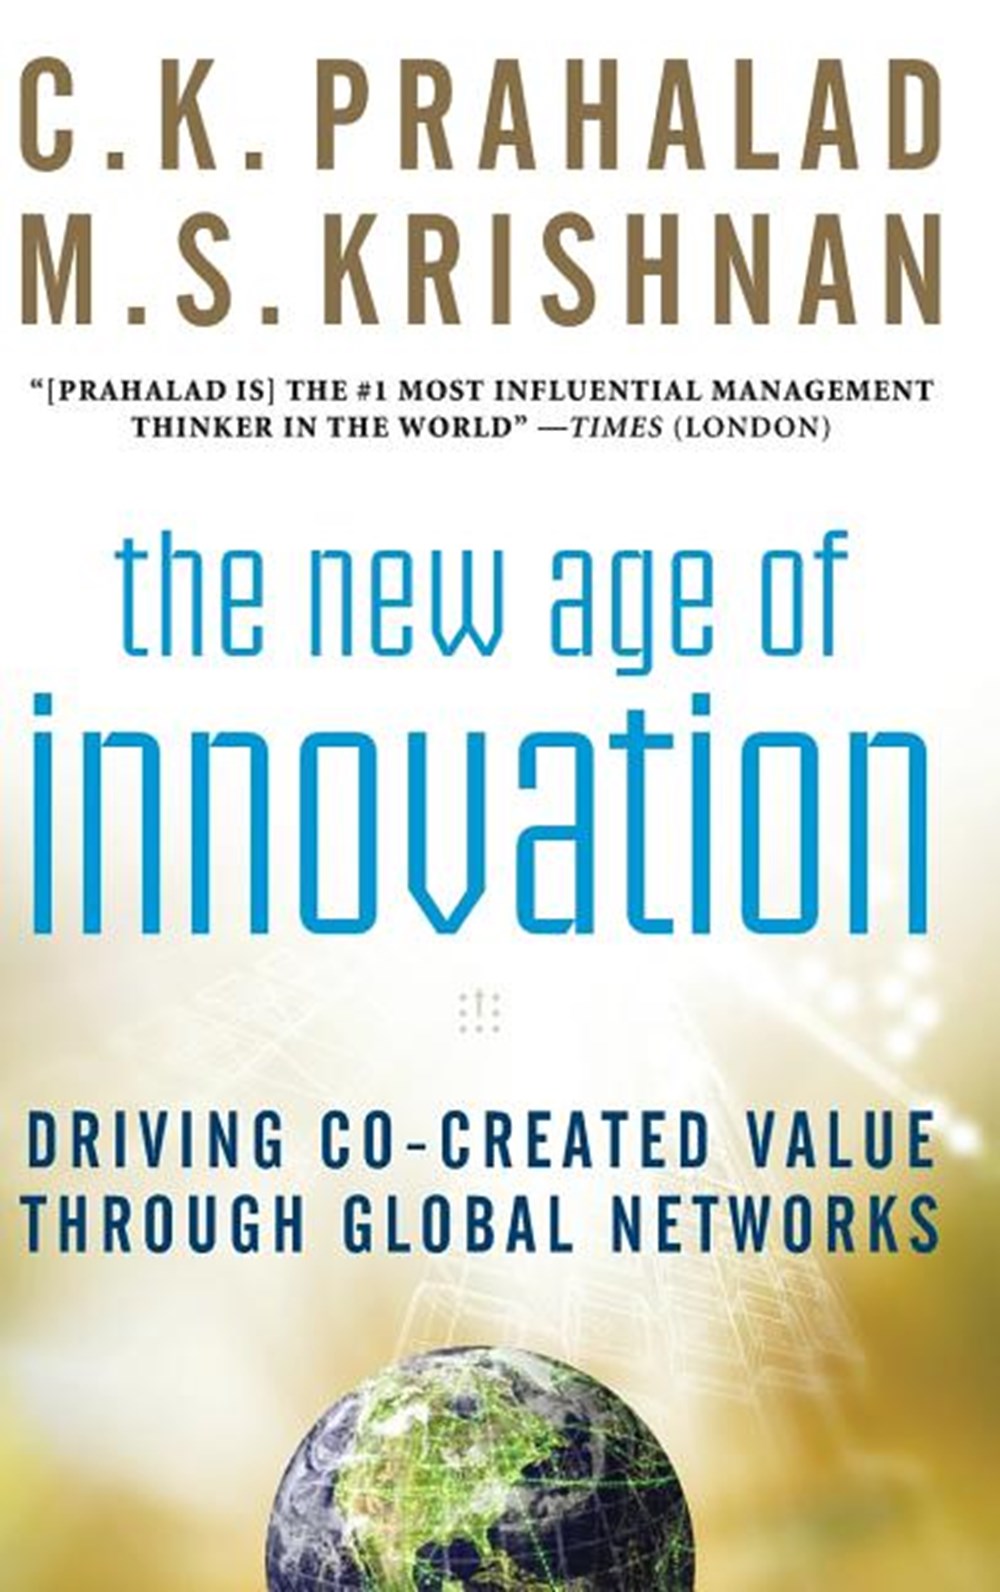 New Age of Innovation: Driving Cocreated Value Through Global Networks